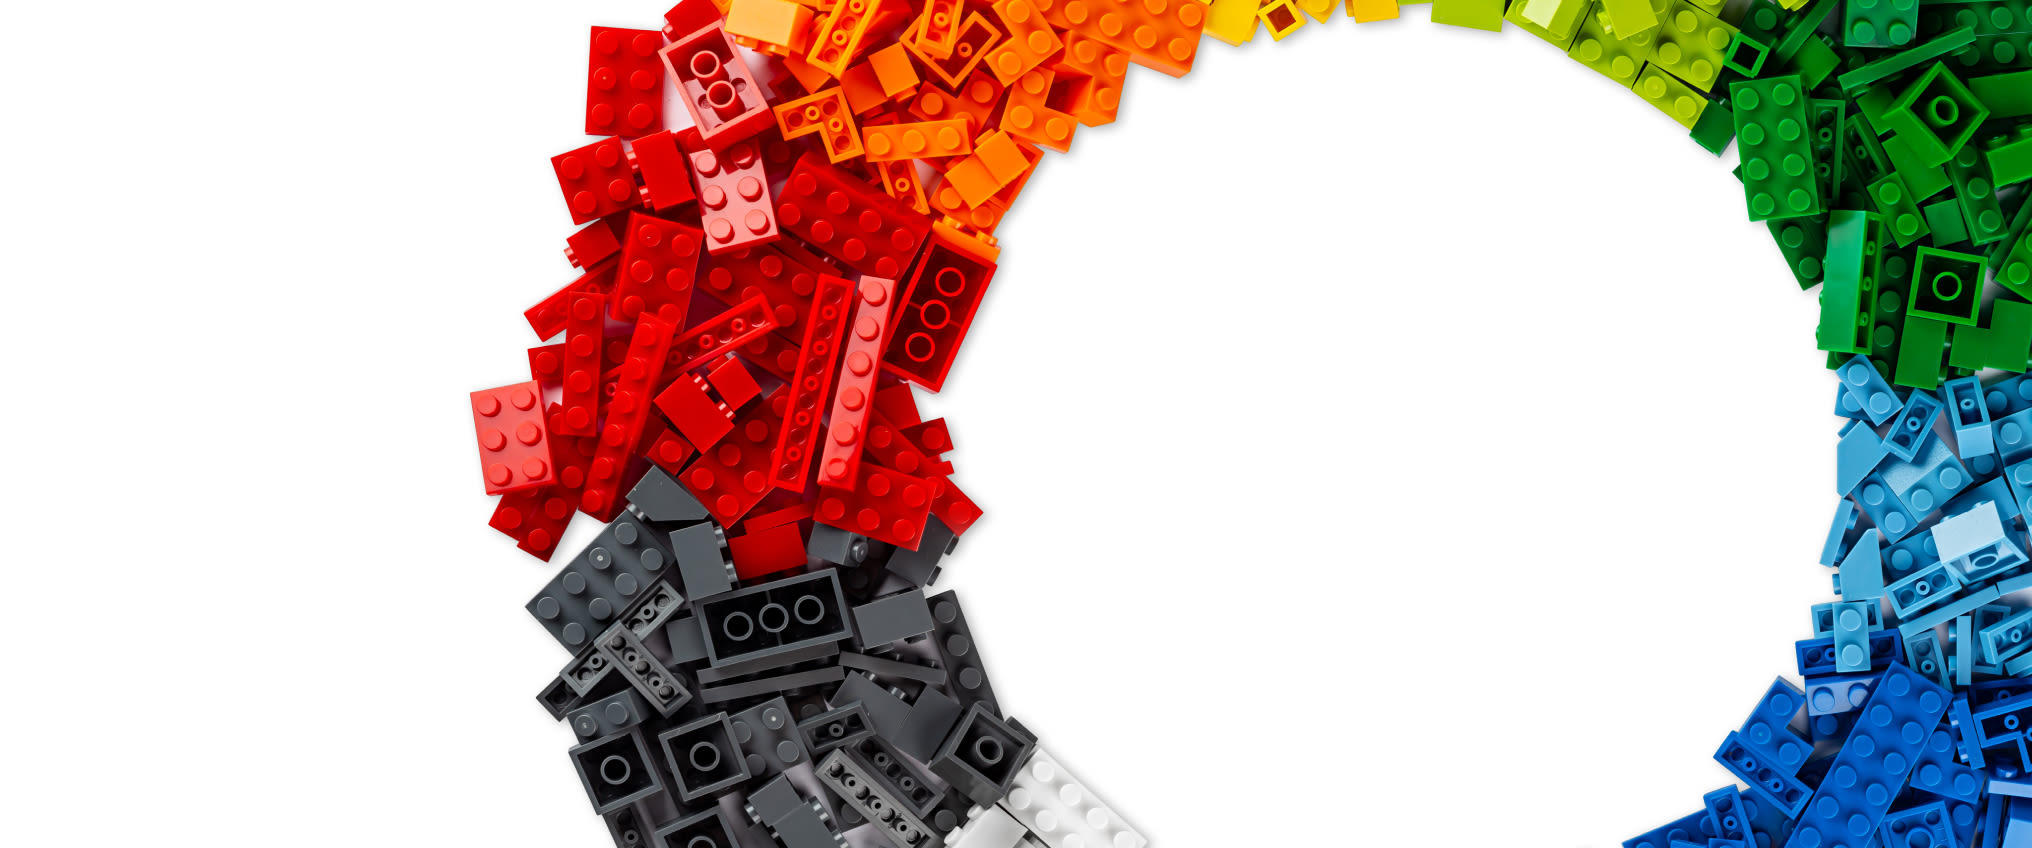 Different coloured Lego blocks in a circle